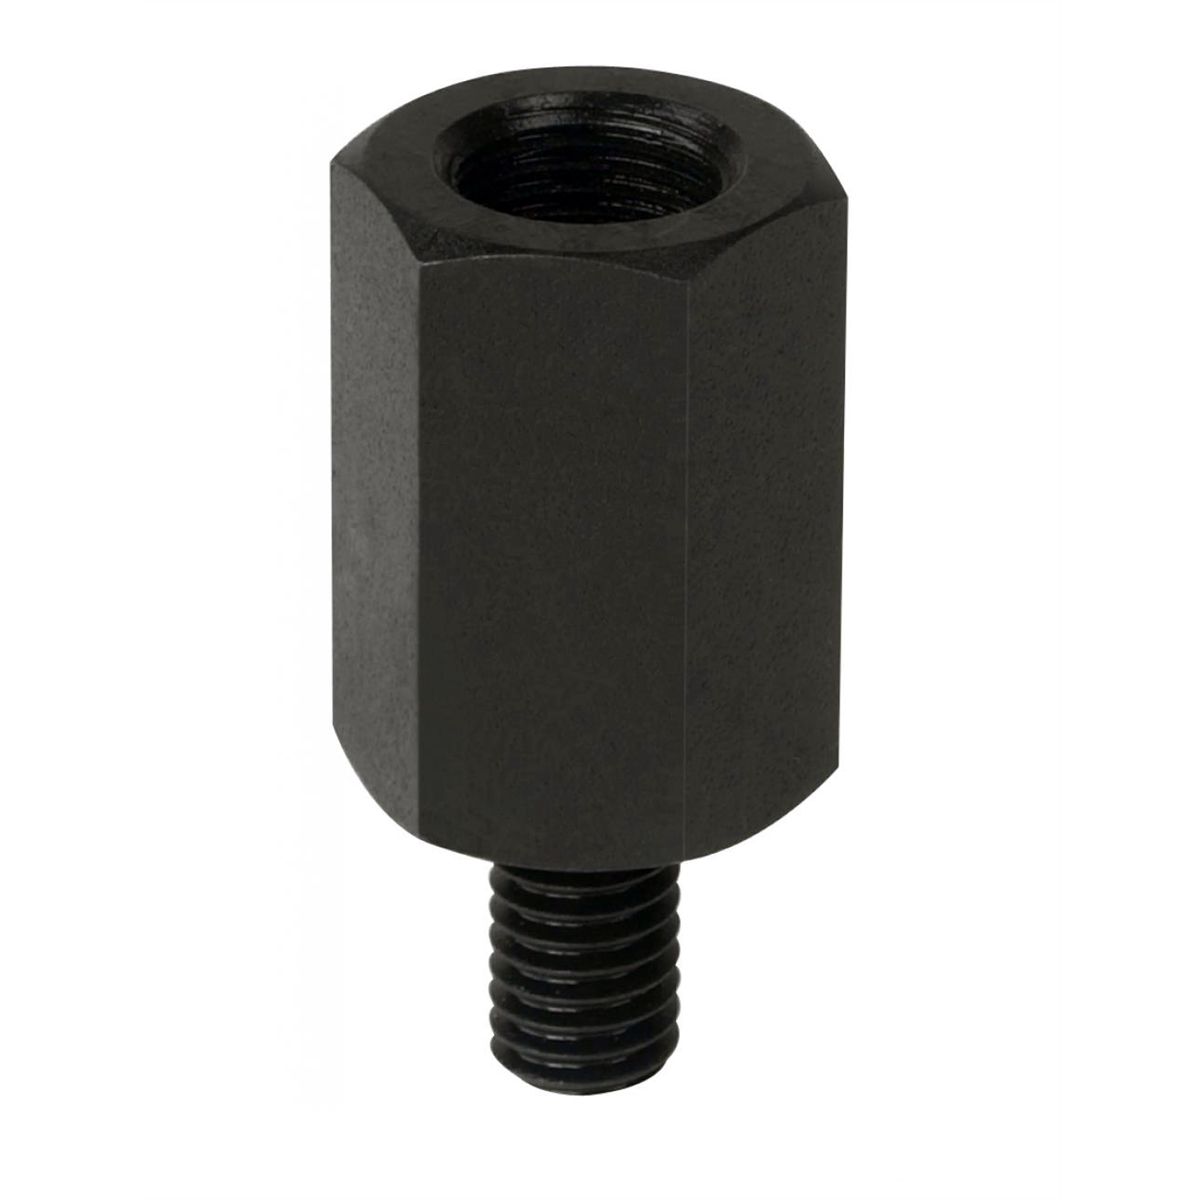 Puller Adapter 5/8-18 Female To 5/16-18 Male...